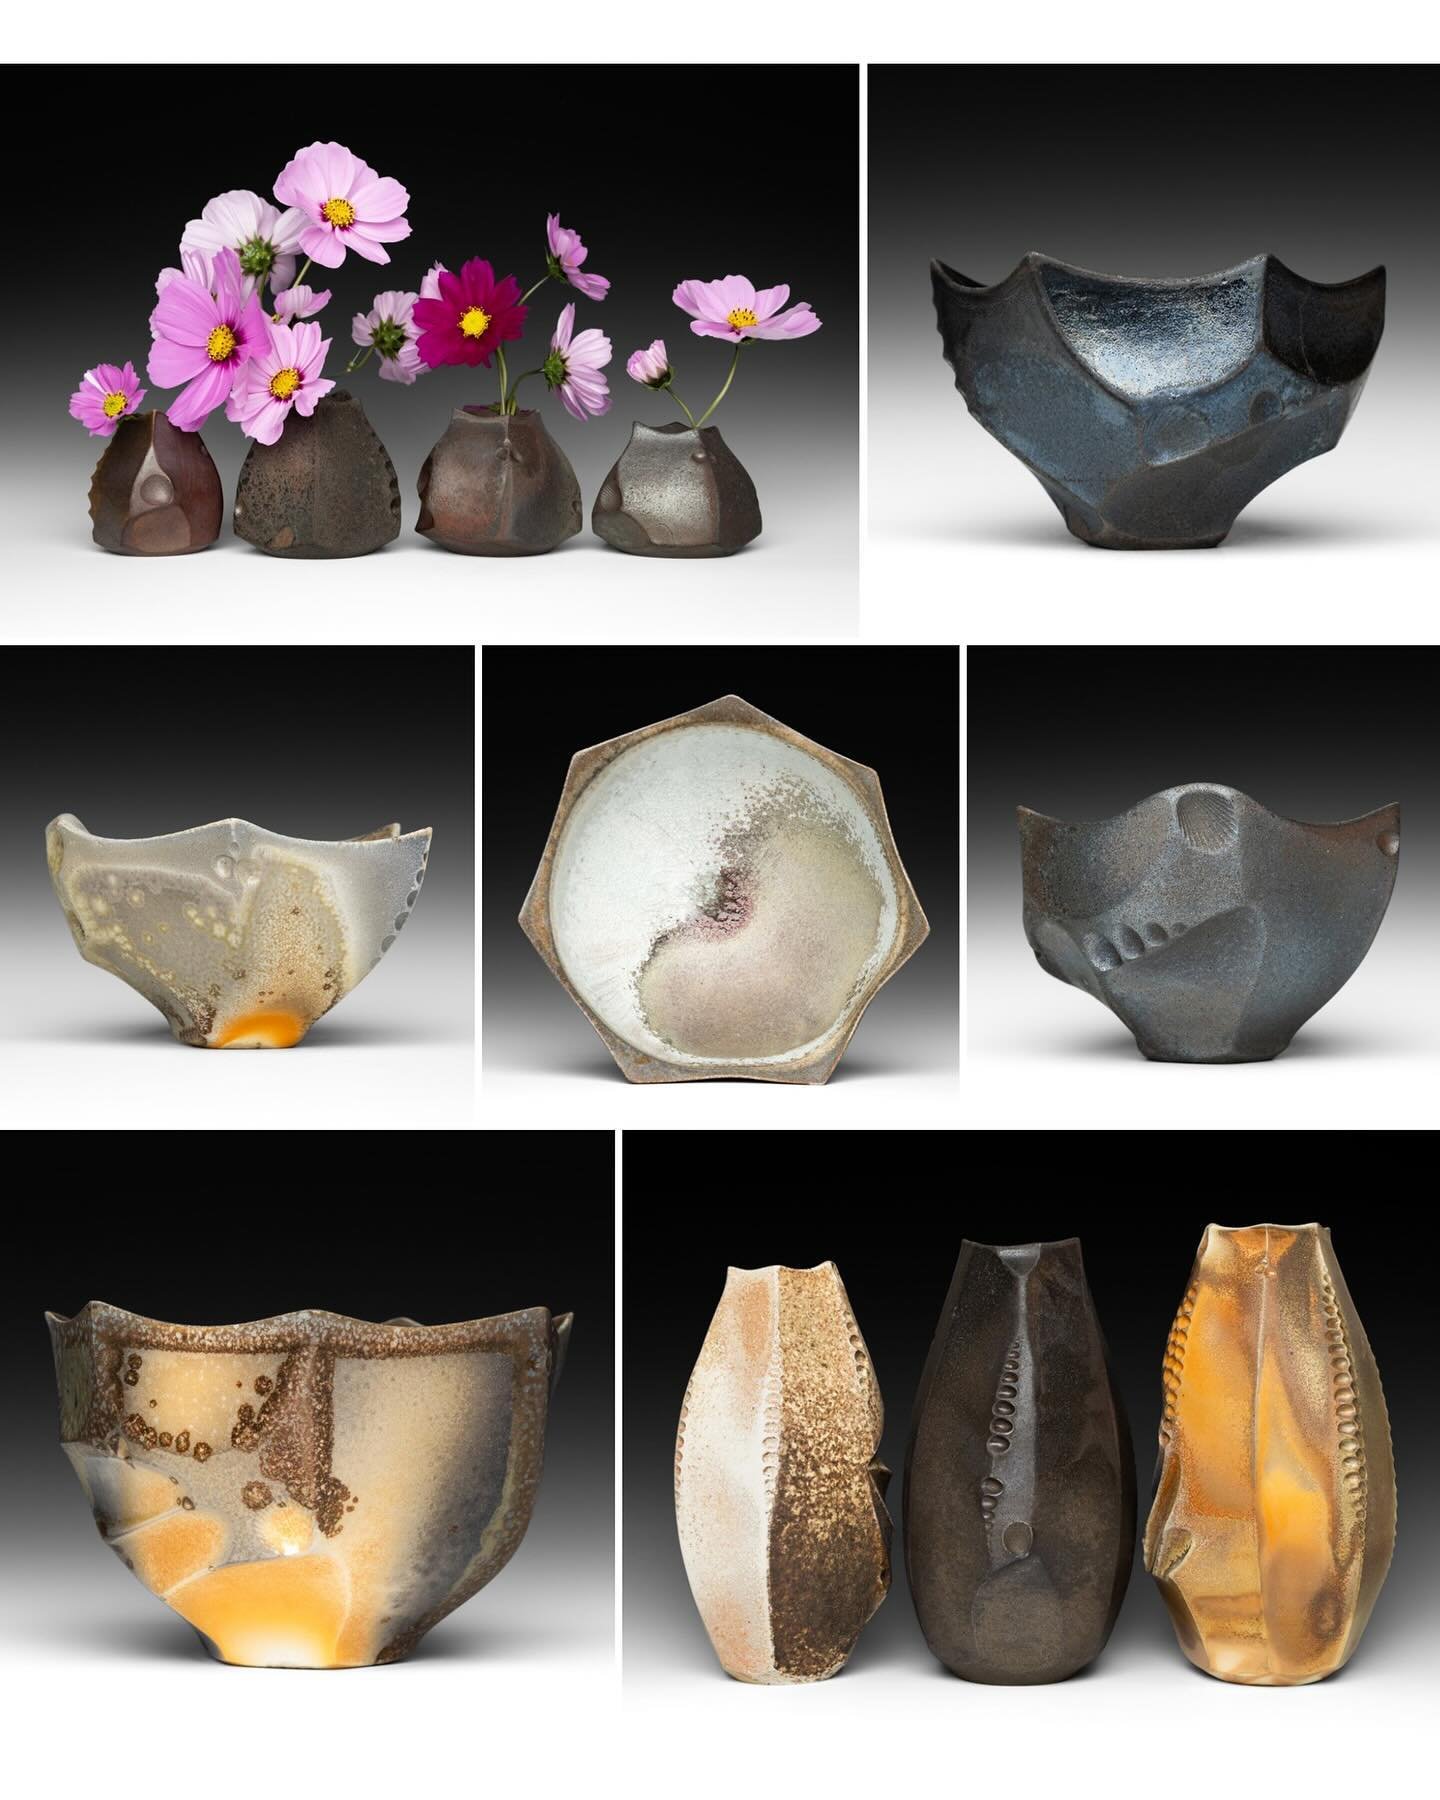 I&rsquo;m thrilled to finally share some exciting news&hellip; I was selected as one of @ceramics_monthly 2024 Emerging Artists!! It&rsquo;s an honor to receive this recognition, and I am filled with so much gratitude for everyone who has shared thei